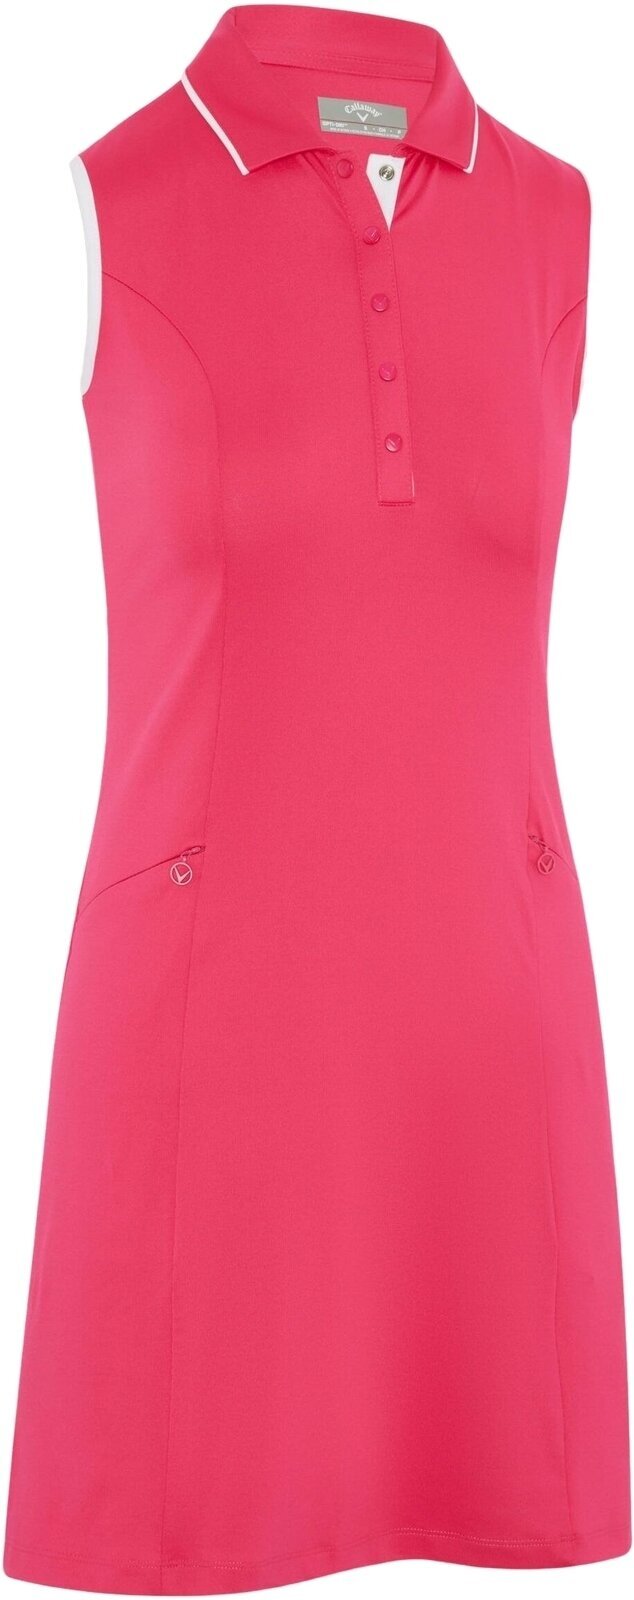 Kleid / Rock Callaway Womens Sleeveless Dress With Snap Placket Pink Peacock S